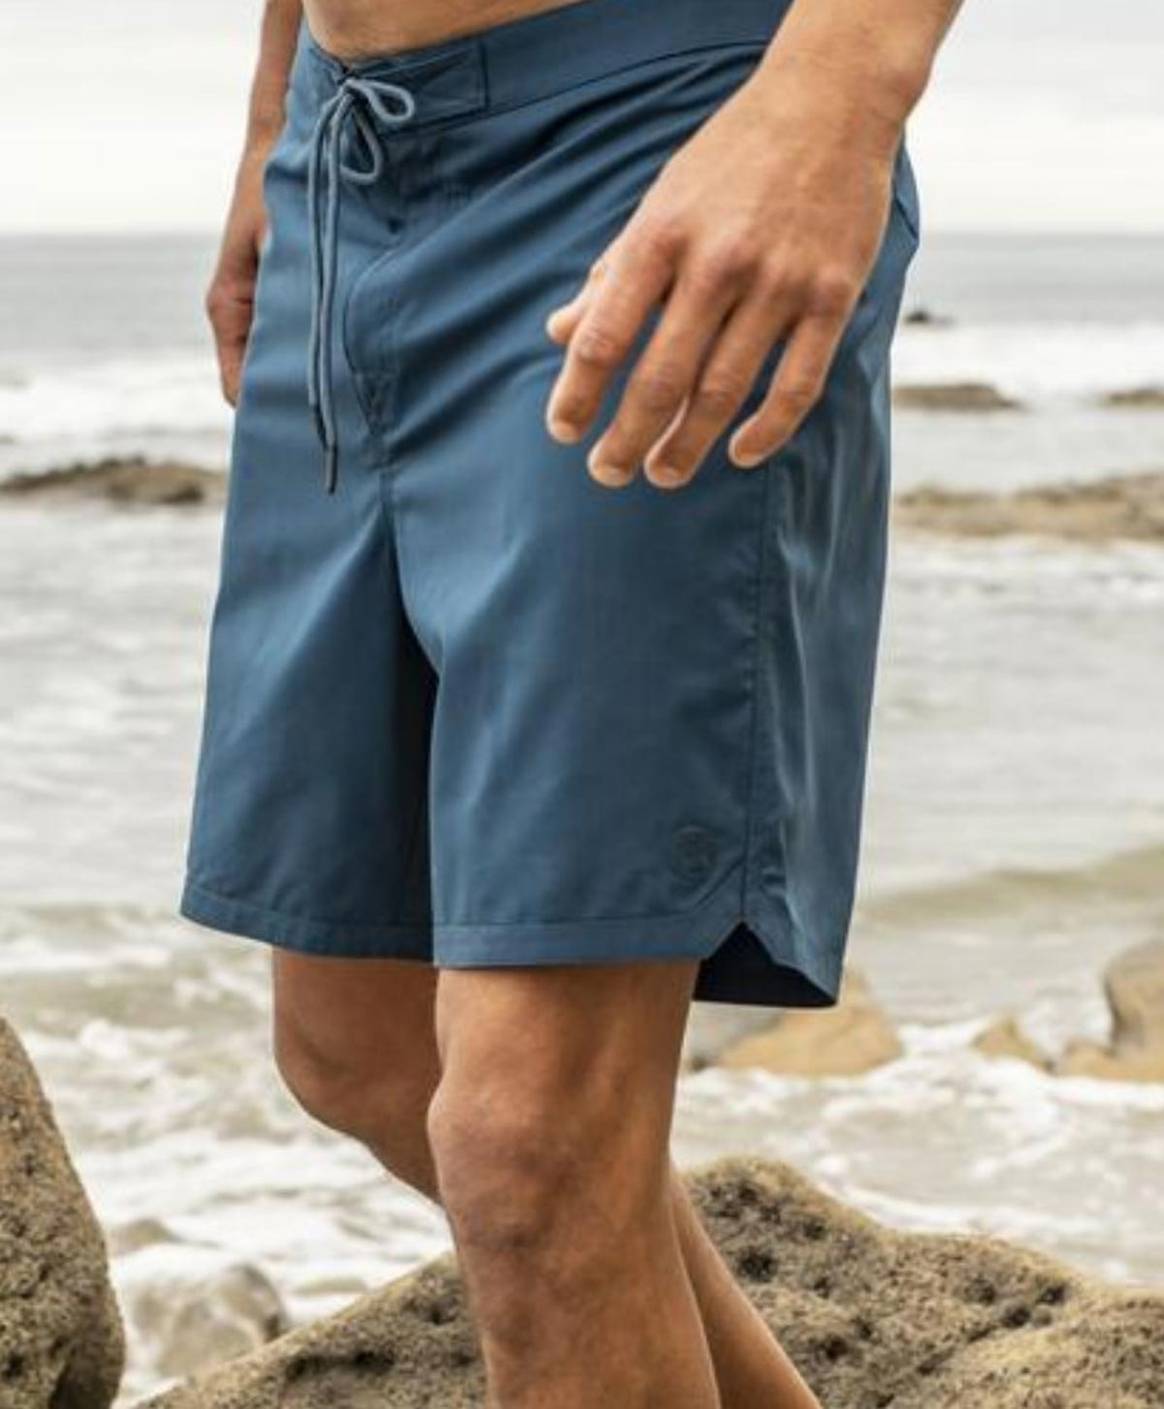 Outerknown introduces world’s first merino wool boardshorts